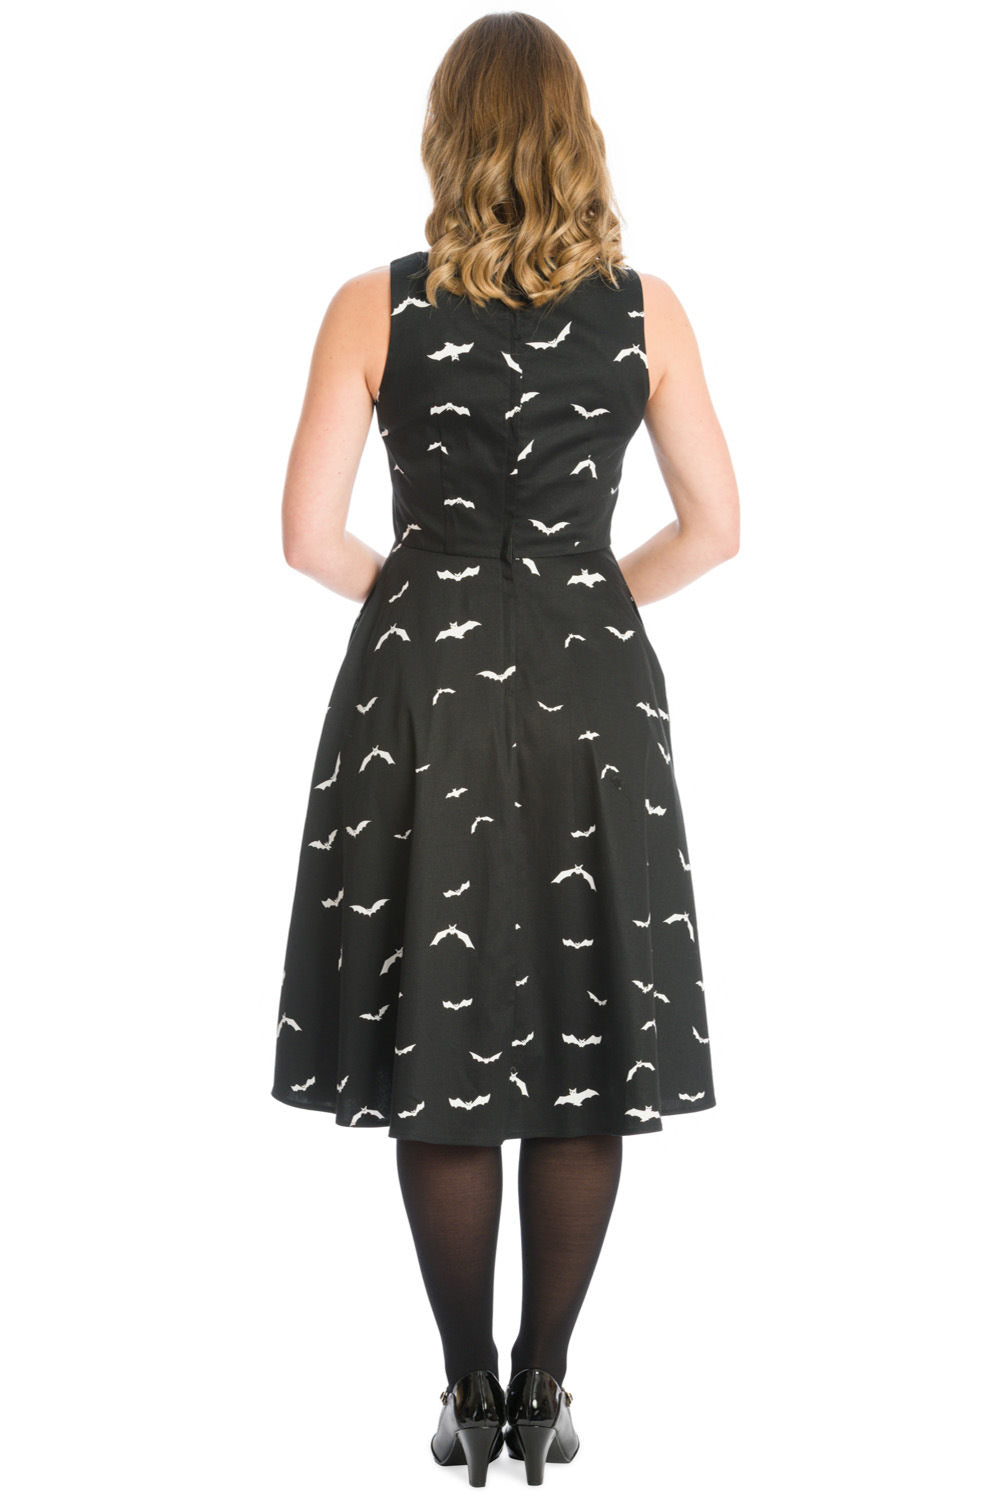 Rear view of a blonde model showcasing a black swing dress with an all-over white bat print